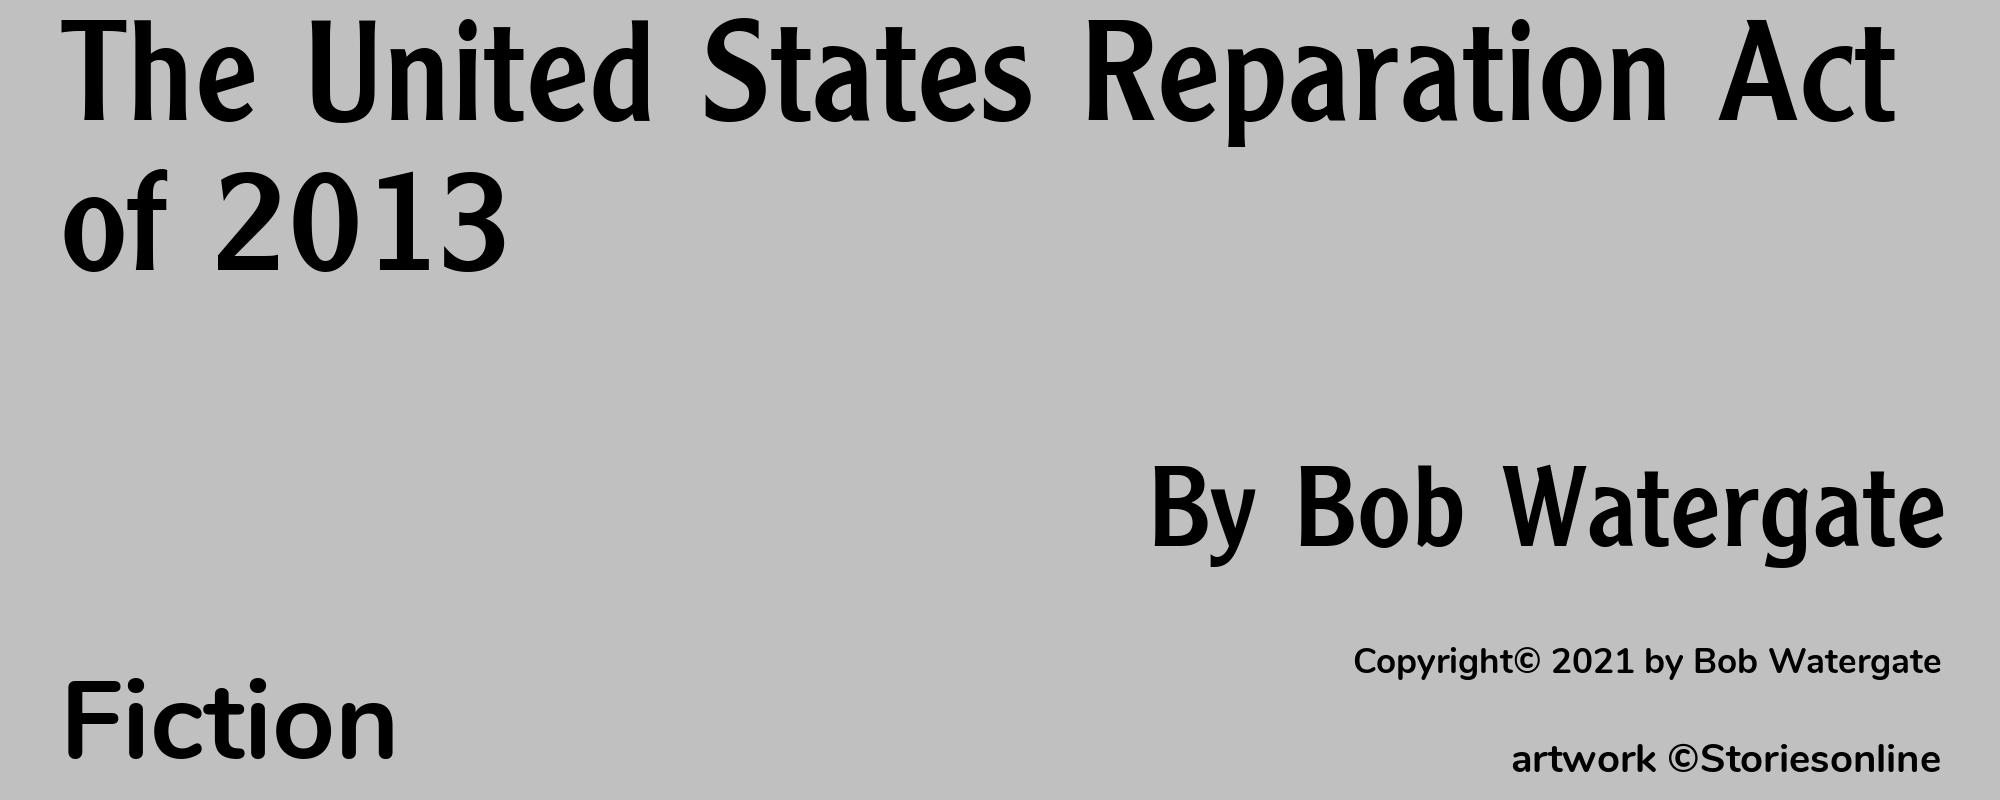 The United States Reparation Act of 2013 - Cover